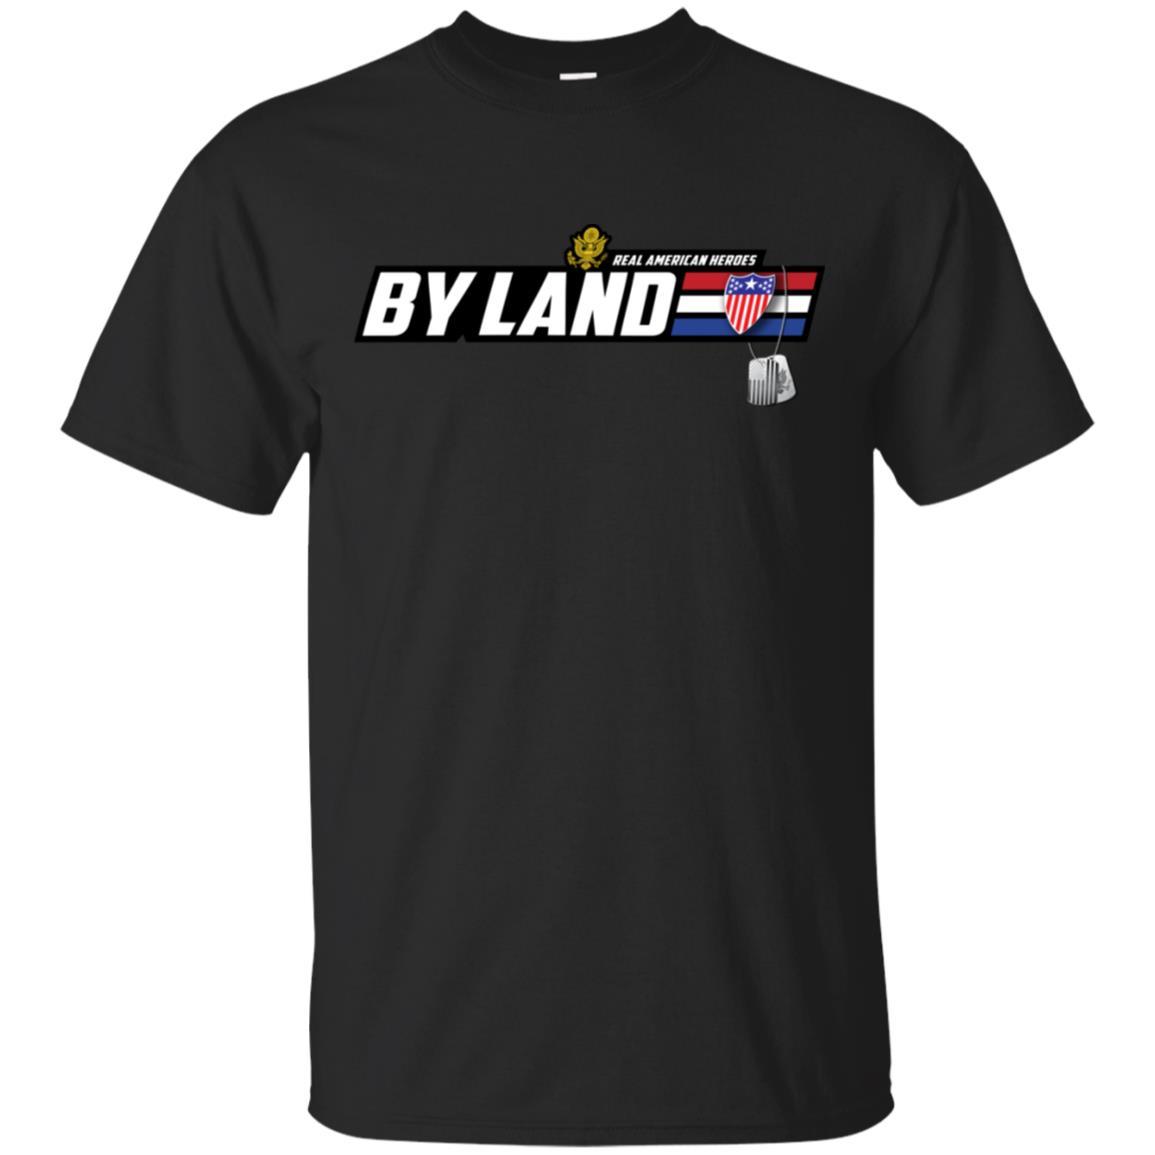 US Army T-Shirt "Adjutant General Real American Heroes By Land" On Front-TShirt-Army-Veterans Nation